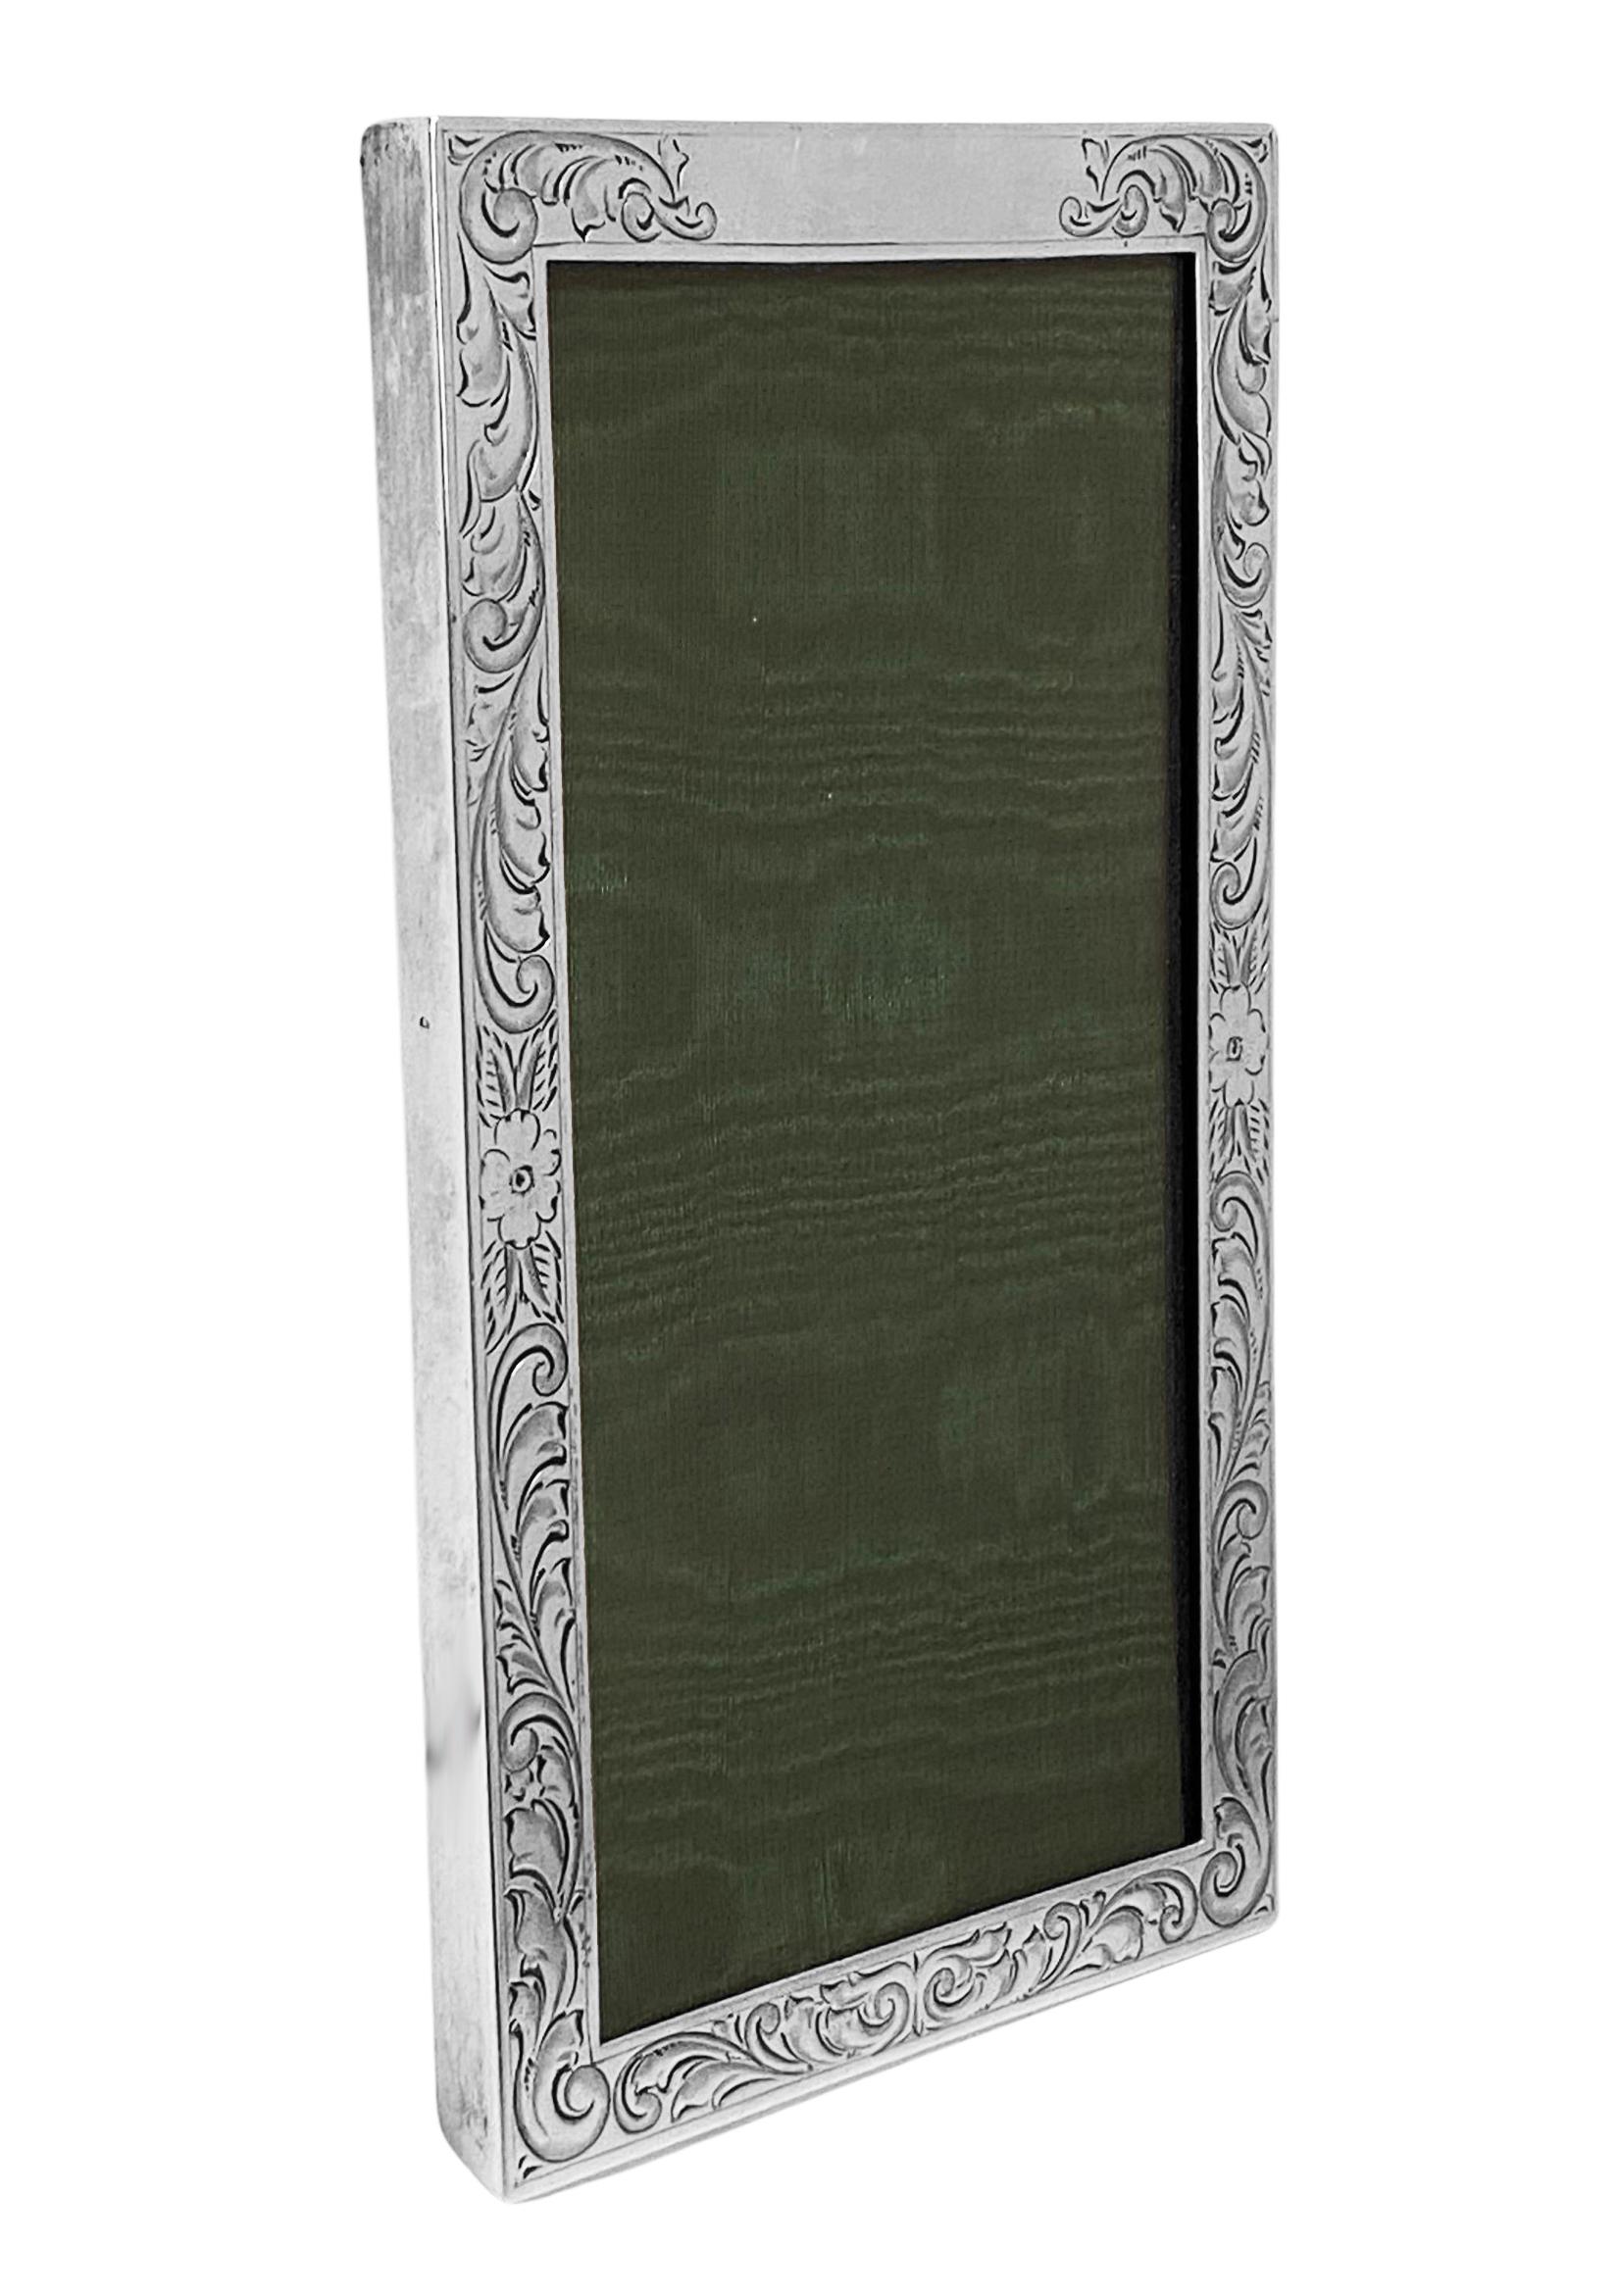 American Gorham sterling silver photograph frame, circa 1900. Rectangular foliate engraved surround decoration. Original back and glass. Silver in very good condition and good thick gauge to silver. Orginal dark green velvet back and green satin